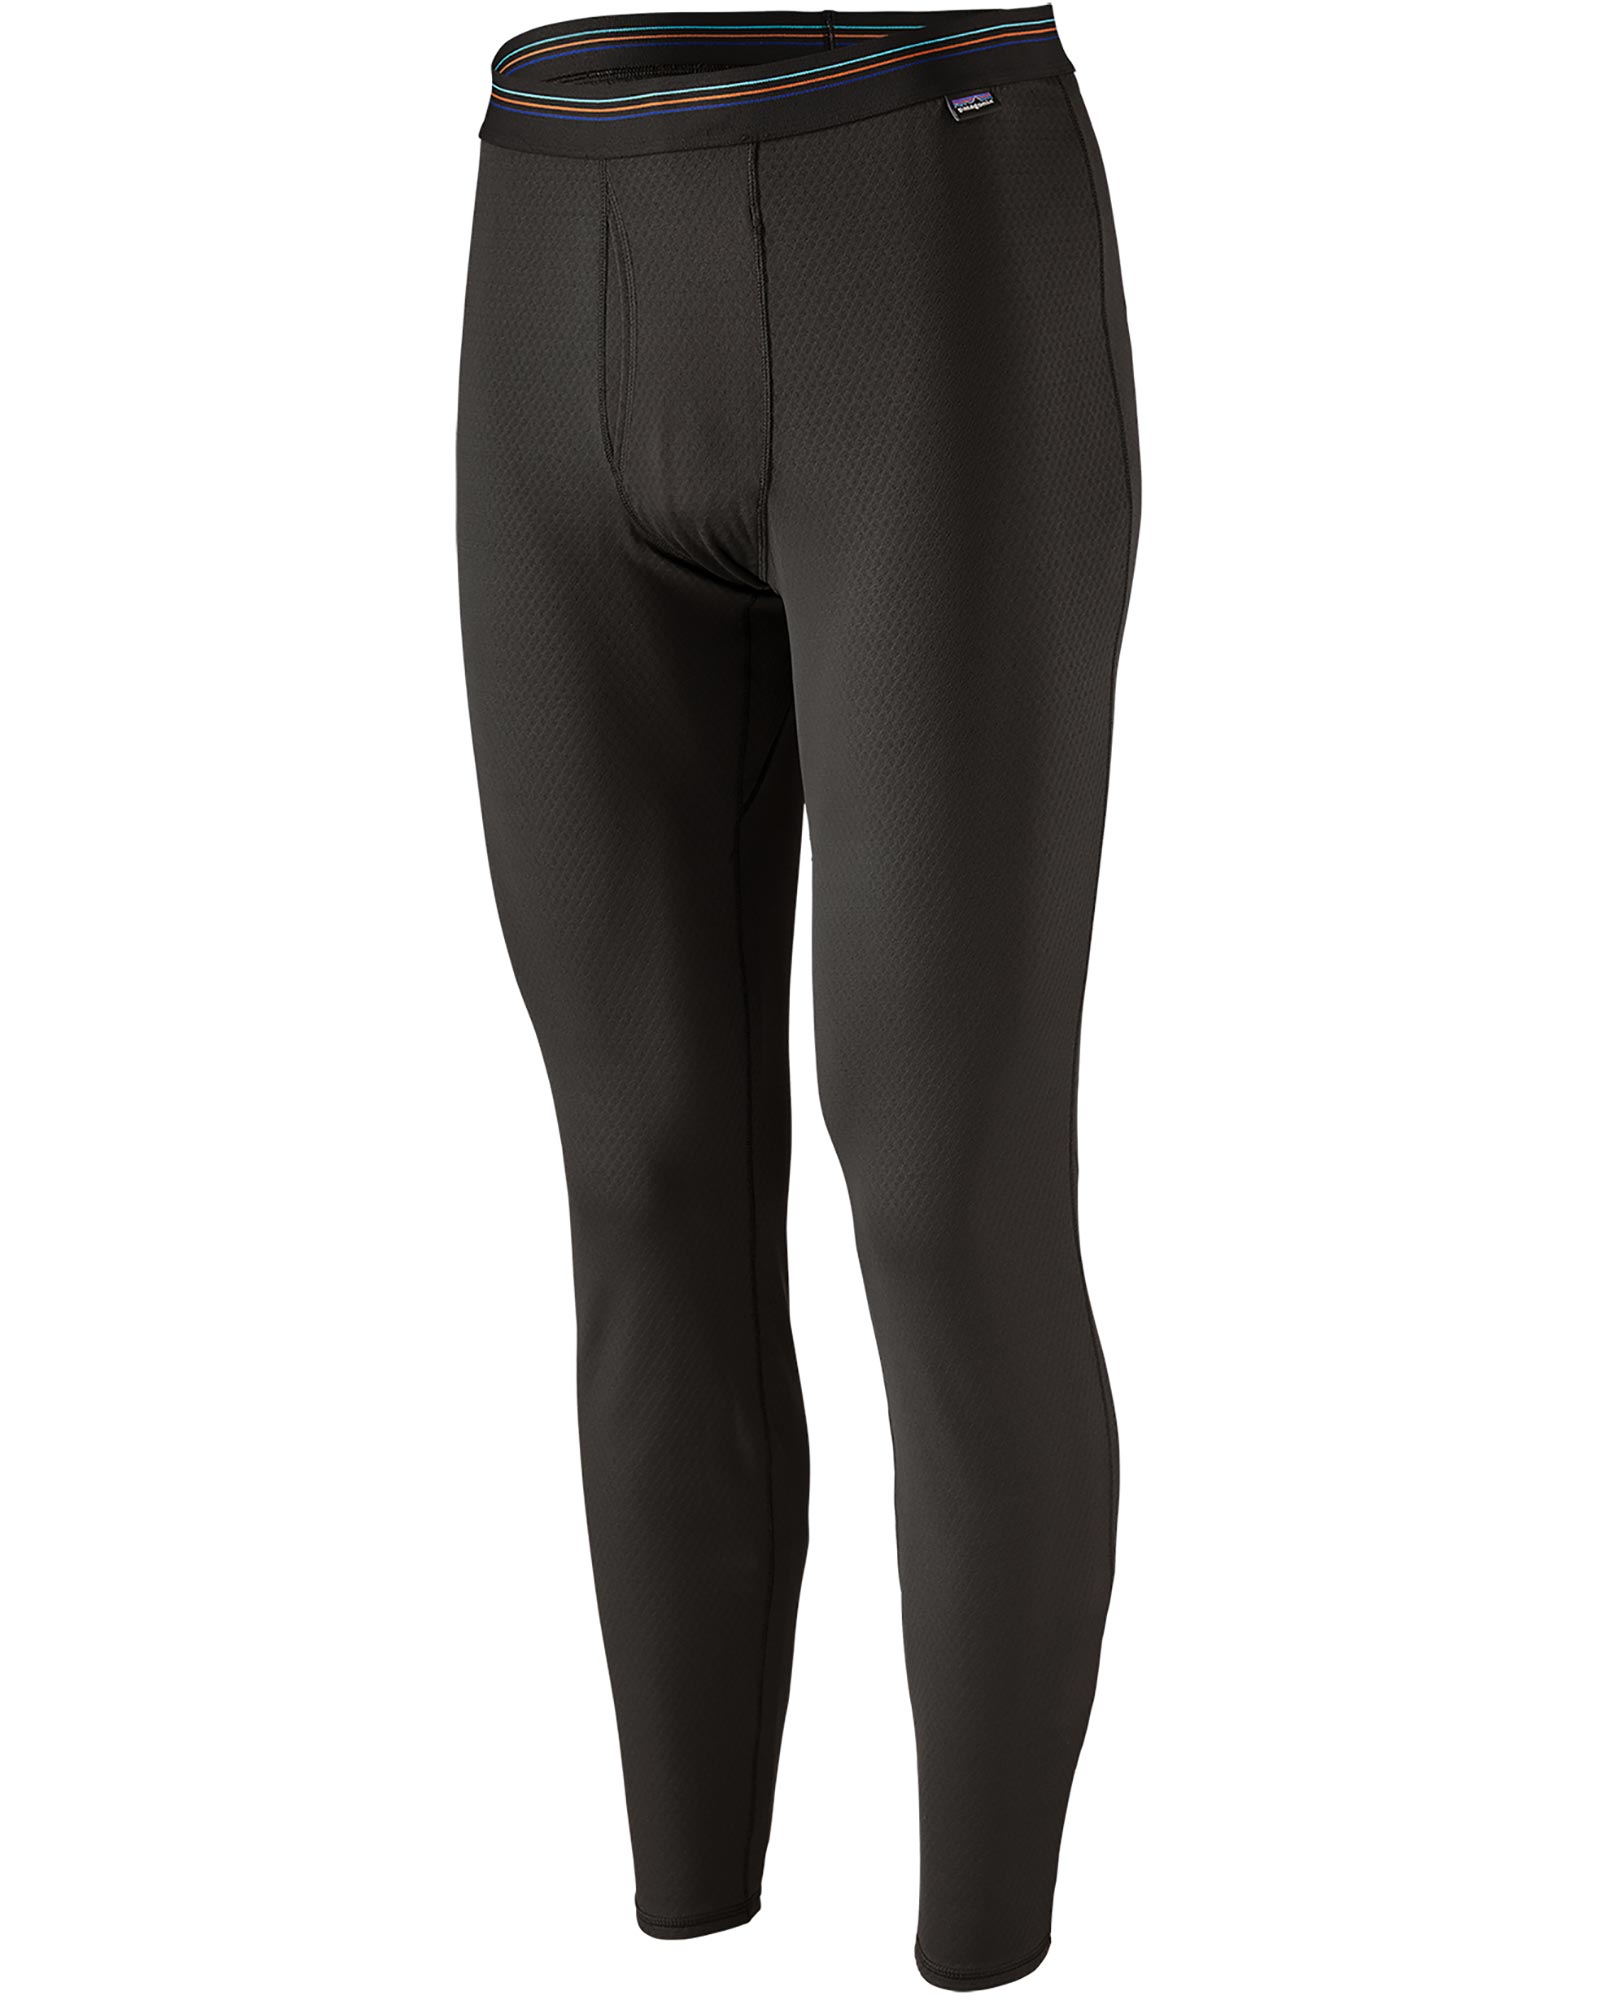 Patagonia Capilene Mens Midweight Tights